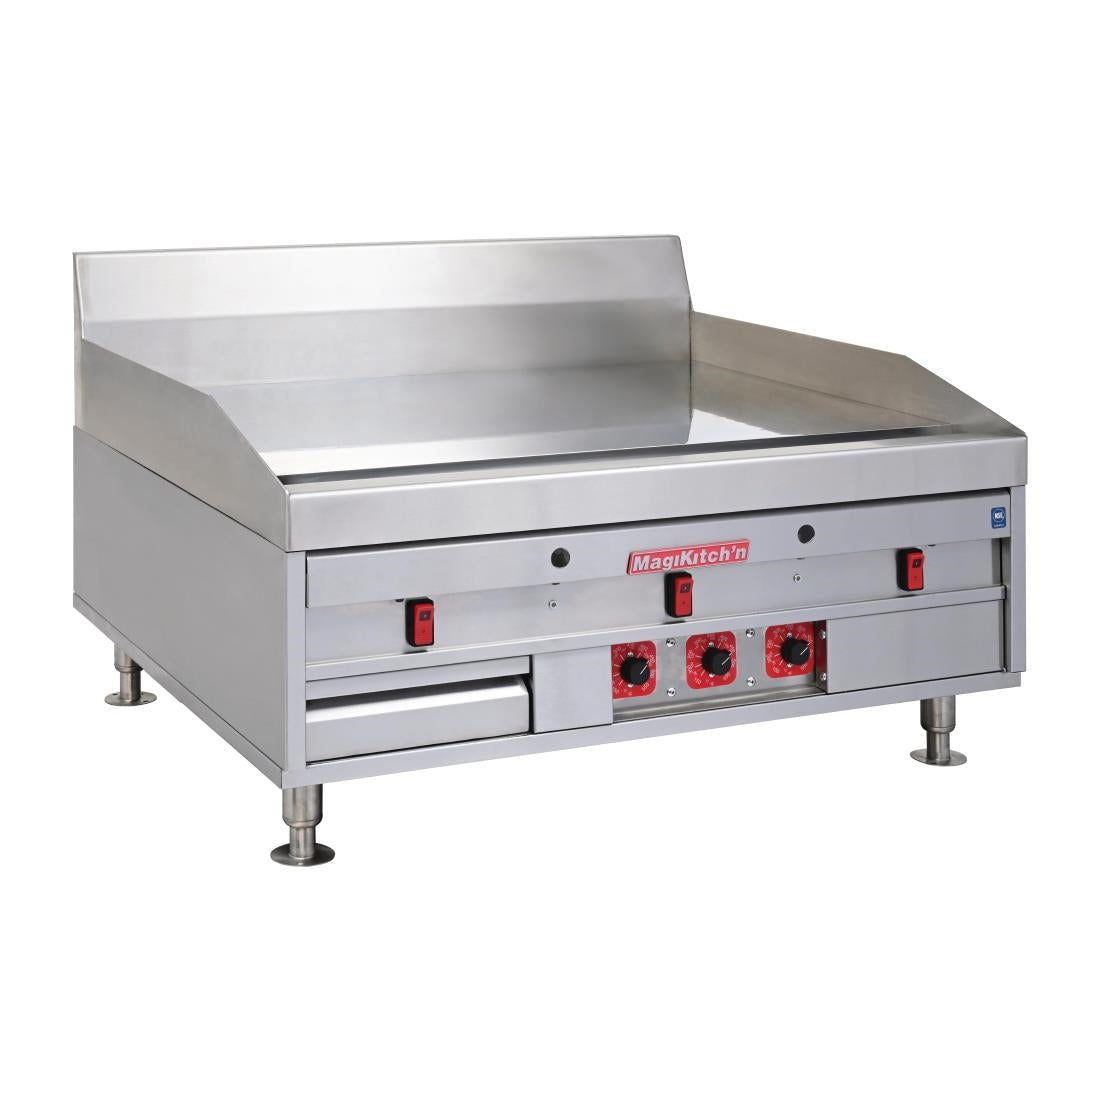 FP870 MagiKitch'n Heavy Duty Chrome Griddle MKG36 JD Catering Equipment Solutions Ltd